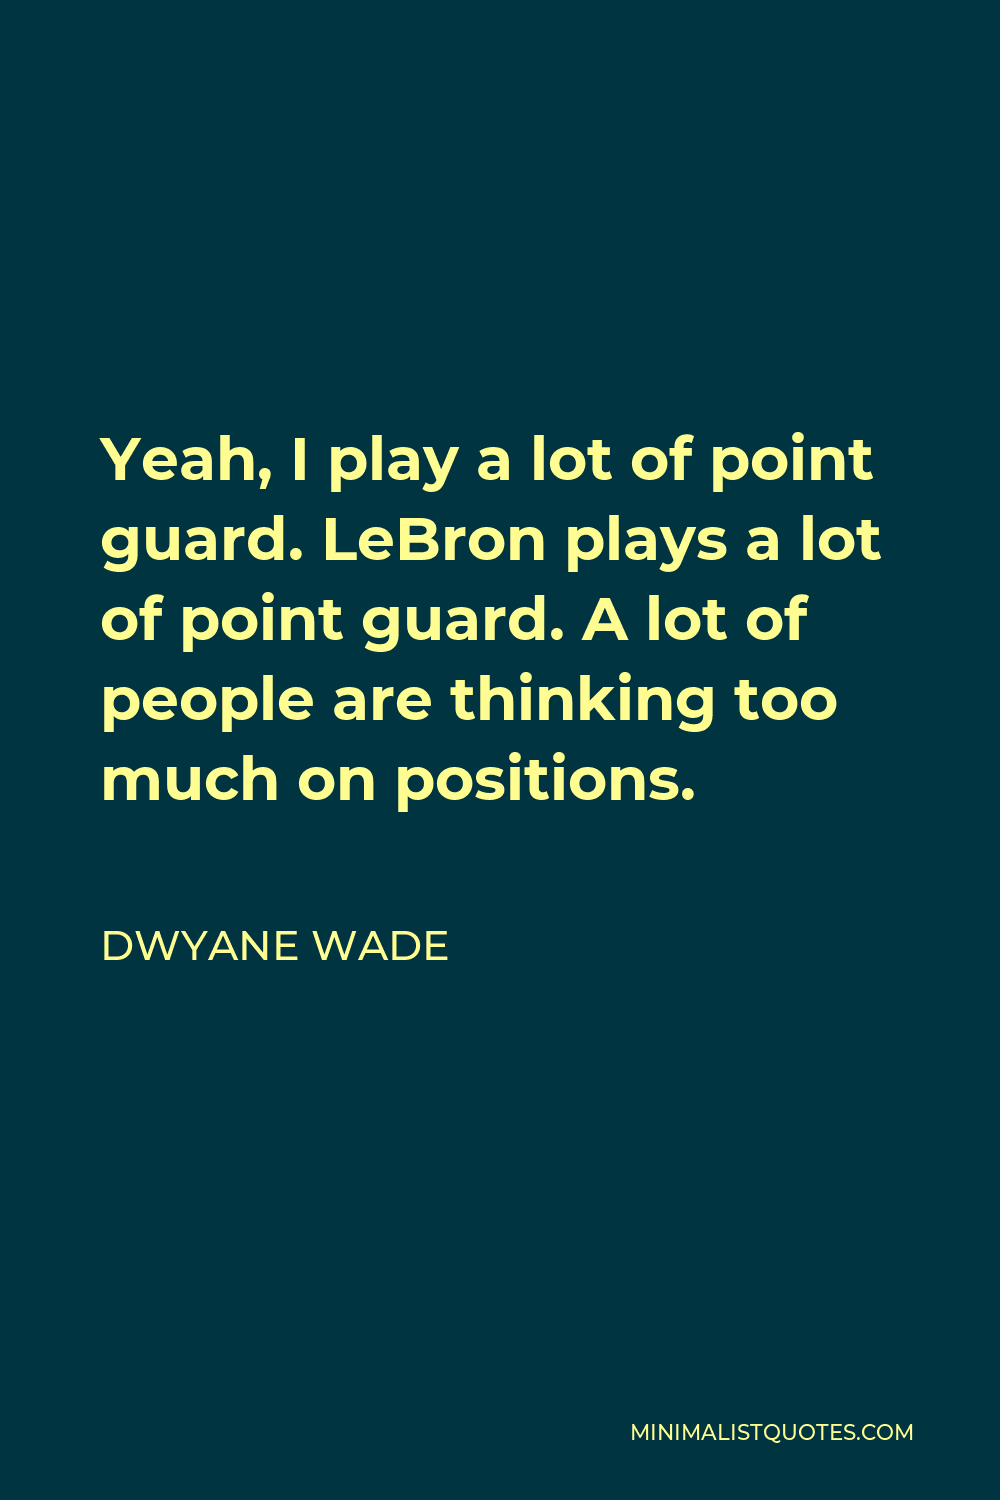 Dwyane Wade Quote - Yeah, I play a lot of point guard. LeBron plays a lot of point guard. A lot of people are thinking too much on positions.